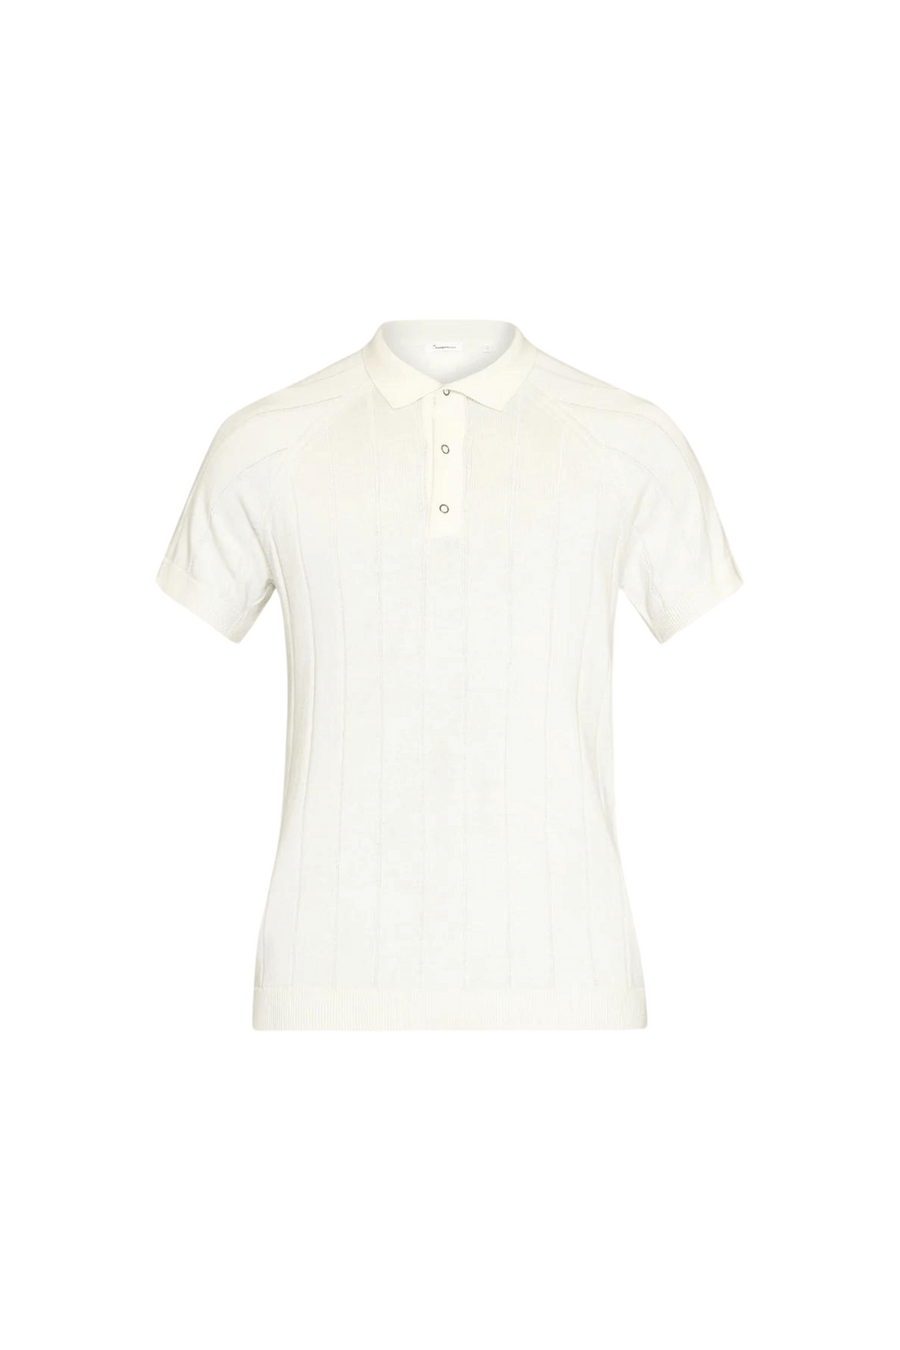 Knowledge Cotton • Knitted Polo • Egret Stripe